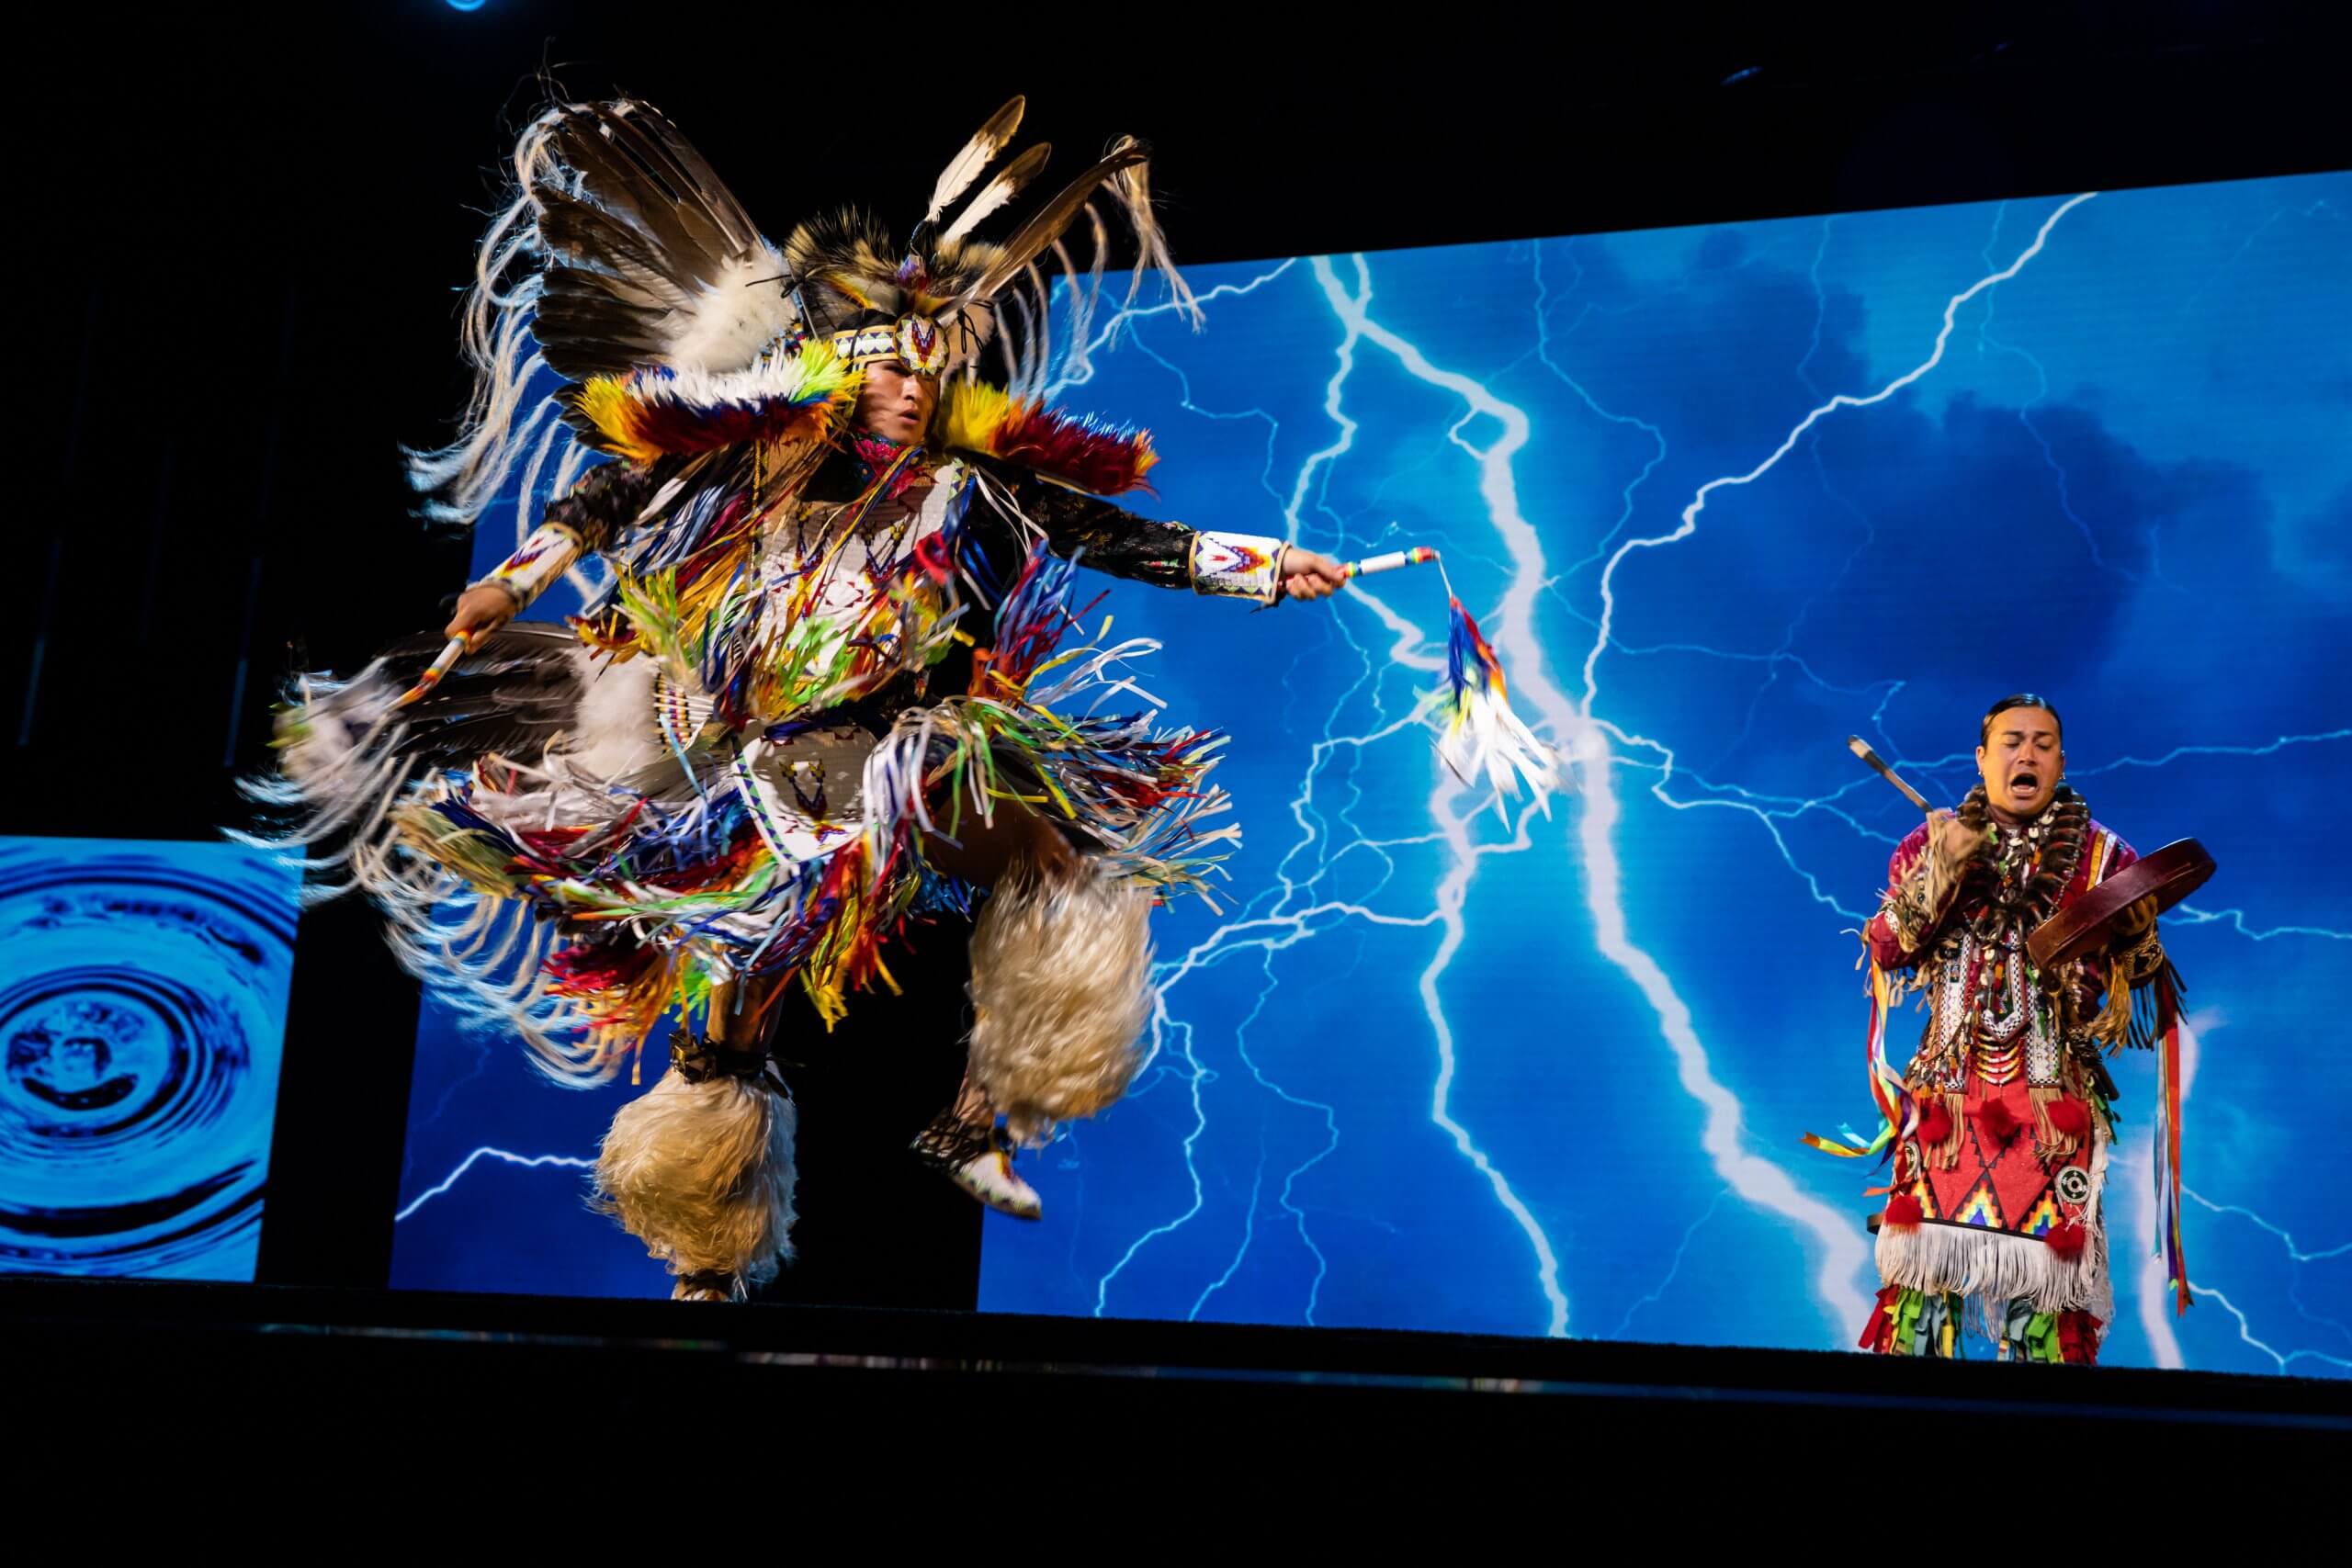 California Indigenous dancing on stage